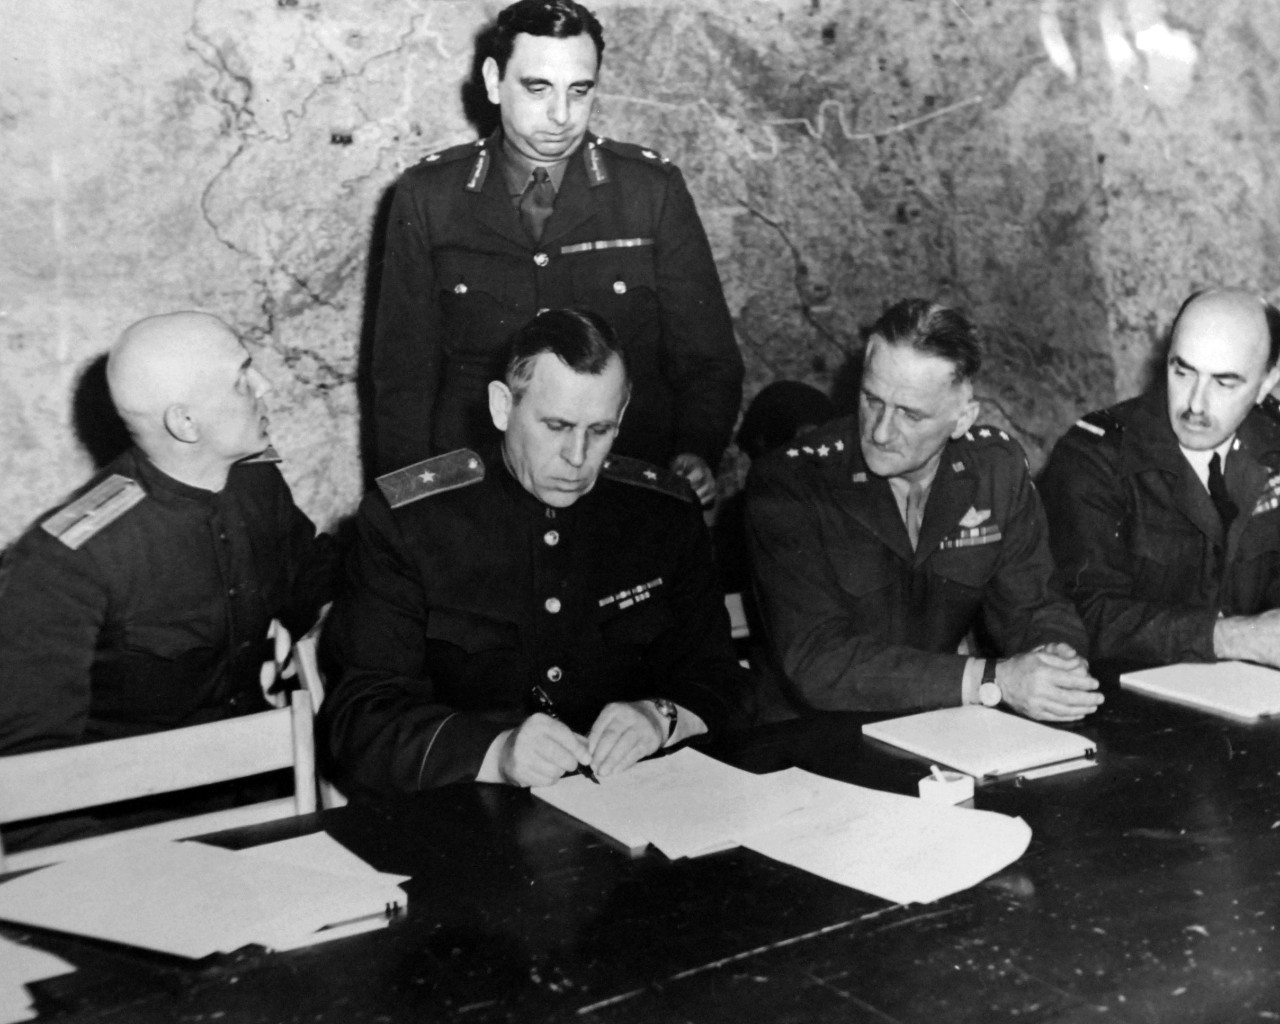 SC-111-SC-27463:   Surrender of Germany, May 7, 1945.  Major General Ivan Alexeyevich Susloparov, Russian Delegate to the SHAEF French Mission and representing the Soviet government, signs the Document of German Capitulation in the War Room of Supreme Headquarters, Allied Expeditionary Forces, at Reims, France, at his left is General Carl A. Spaatz, CG, US Staff, and Air Marshall Sir J.M. Robb, on General Susloparov’s right is Lieutenant Ivan Cherniaeff, Russian Interpreter.  Standing is Major General K.W.D. Strong, G-2, SHAEF.  U.S. Army photograph.  Courtesy of the Library of Congress Collection, Lot-8988. (2015/10/16).